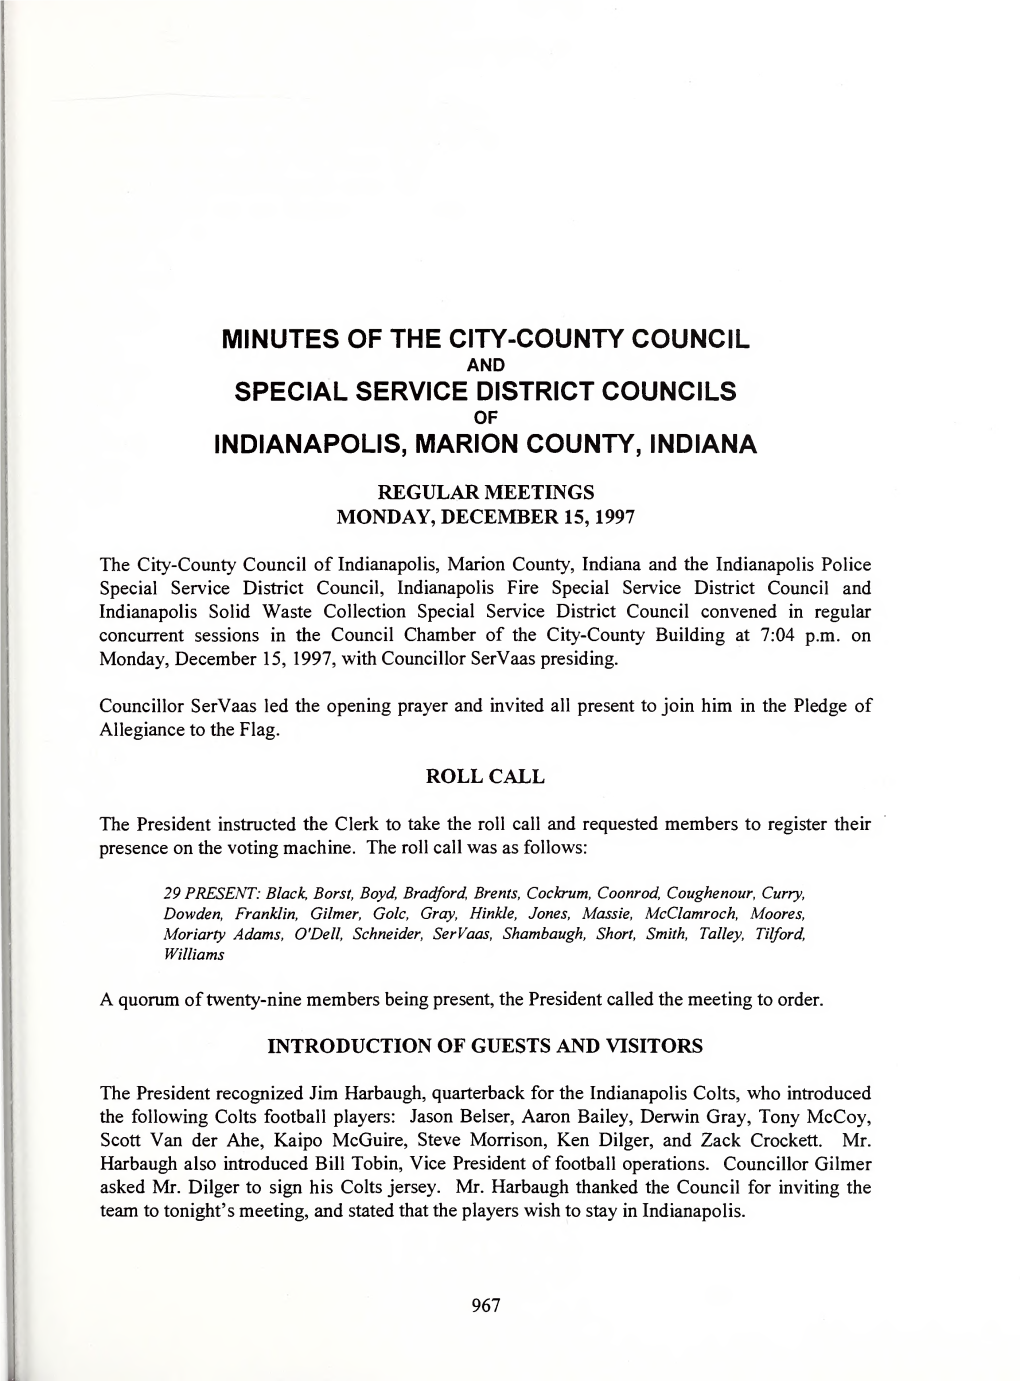 Journal of Proceedings of the City-County Council of Indianapolis